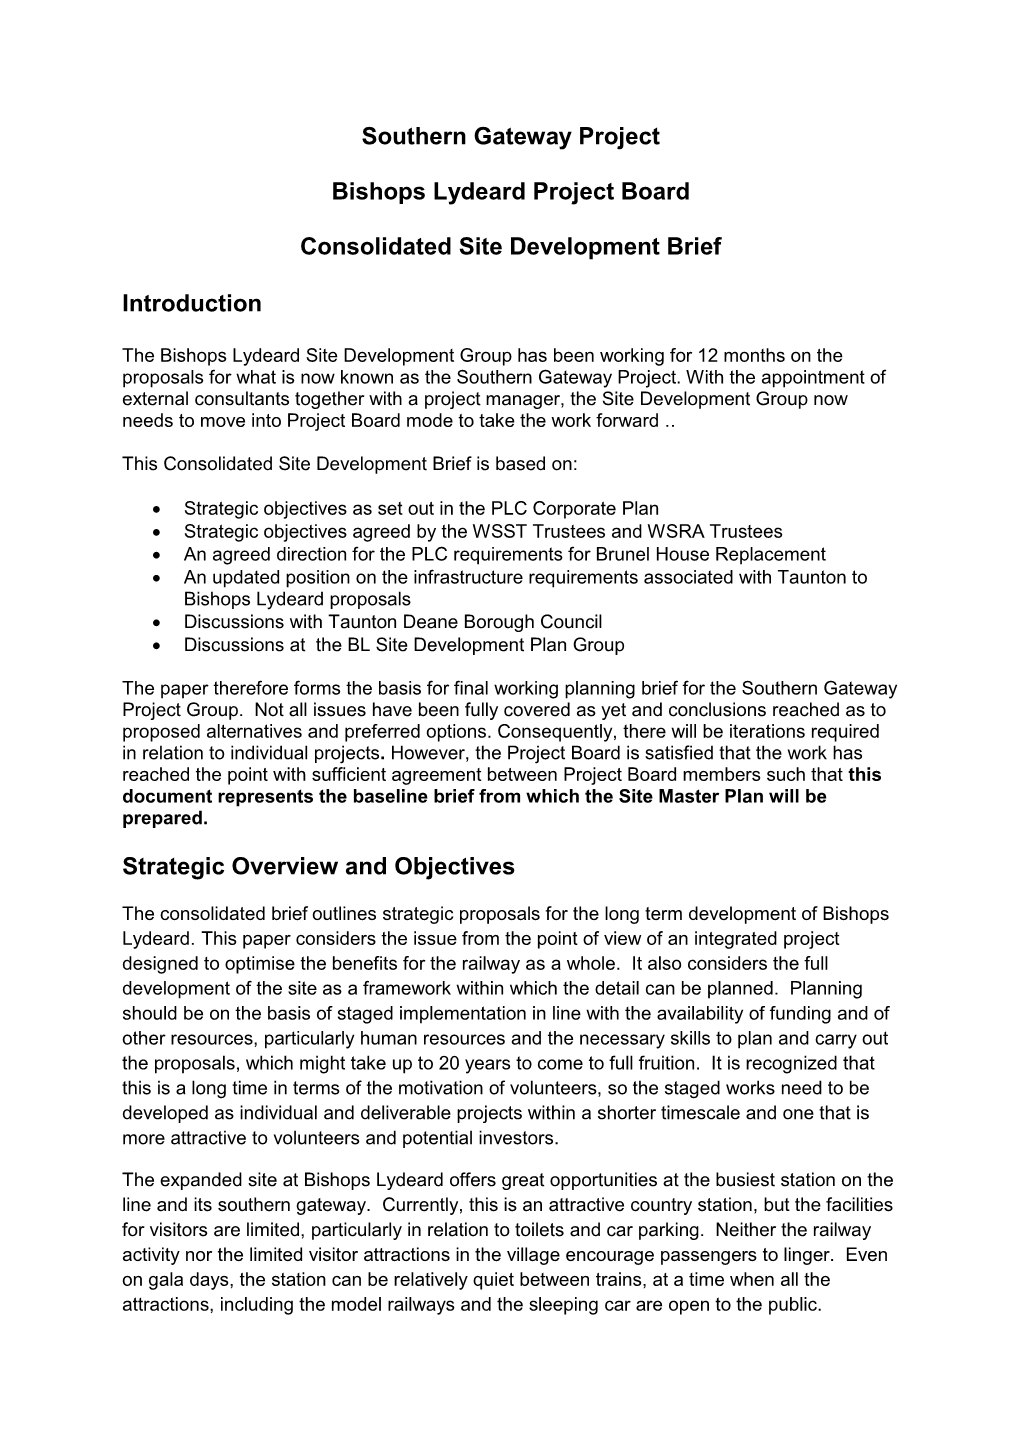 Southern Gateway Project Consolidated Planning Brief